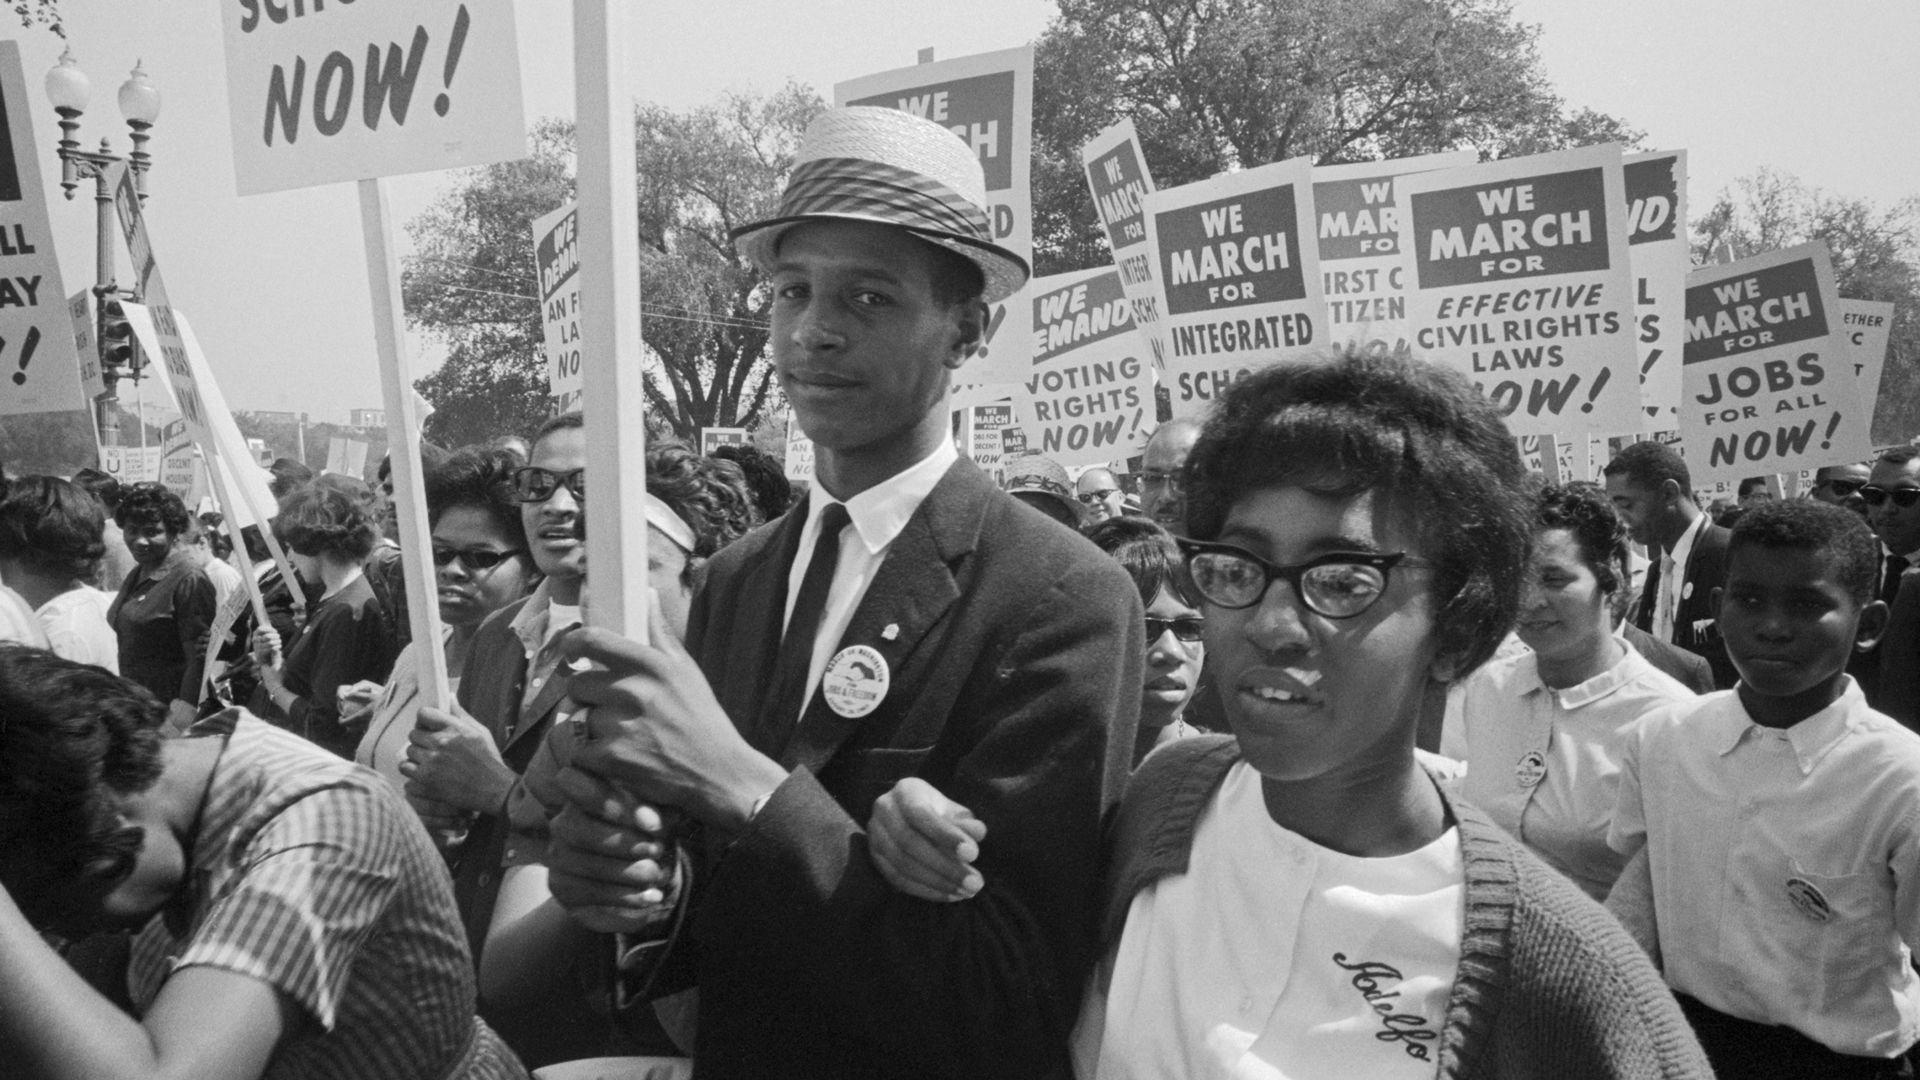 Explore the Black leaders, artists and activists have shaped our nation